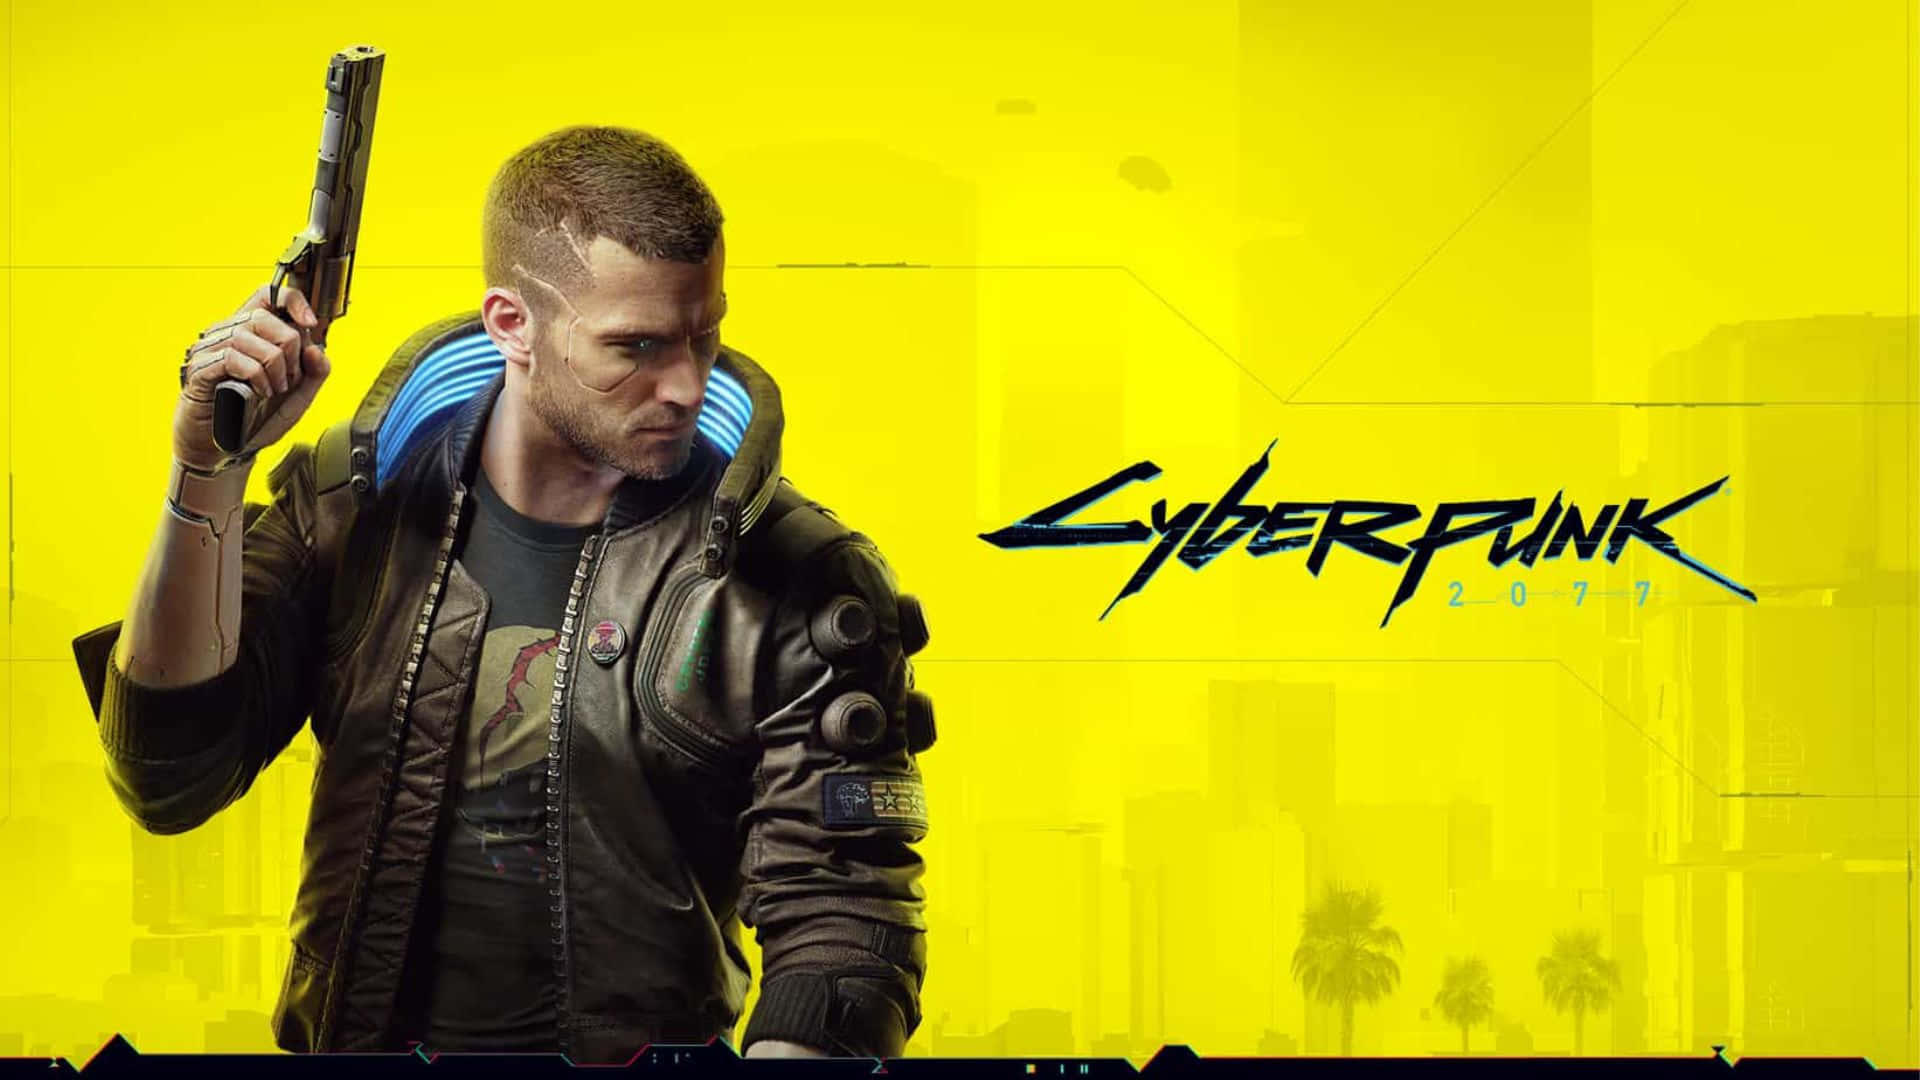 Action-packed scene featuring key characters from Cyberpunk 2077 Wallpaper